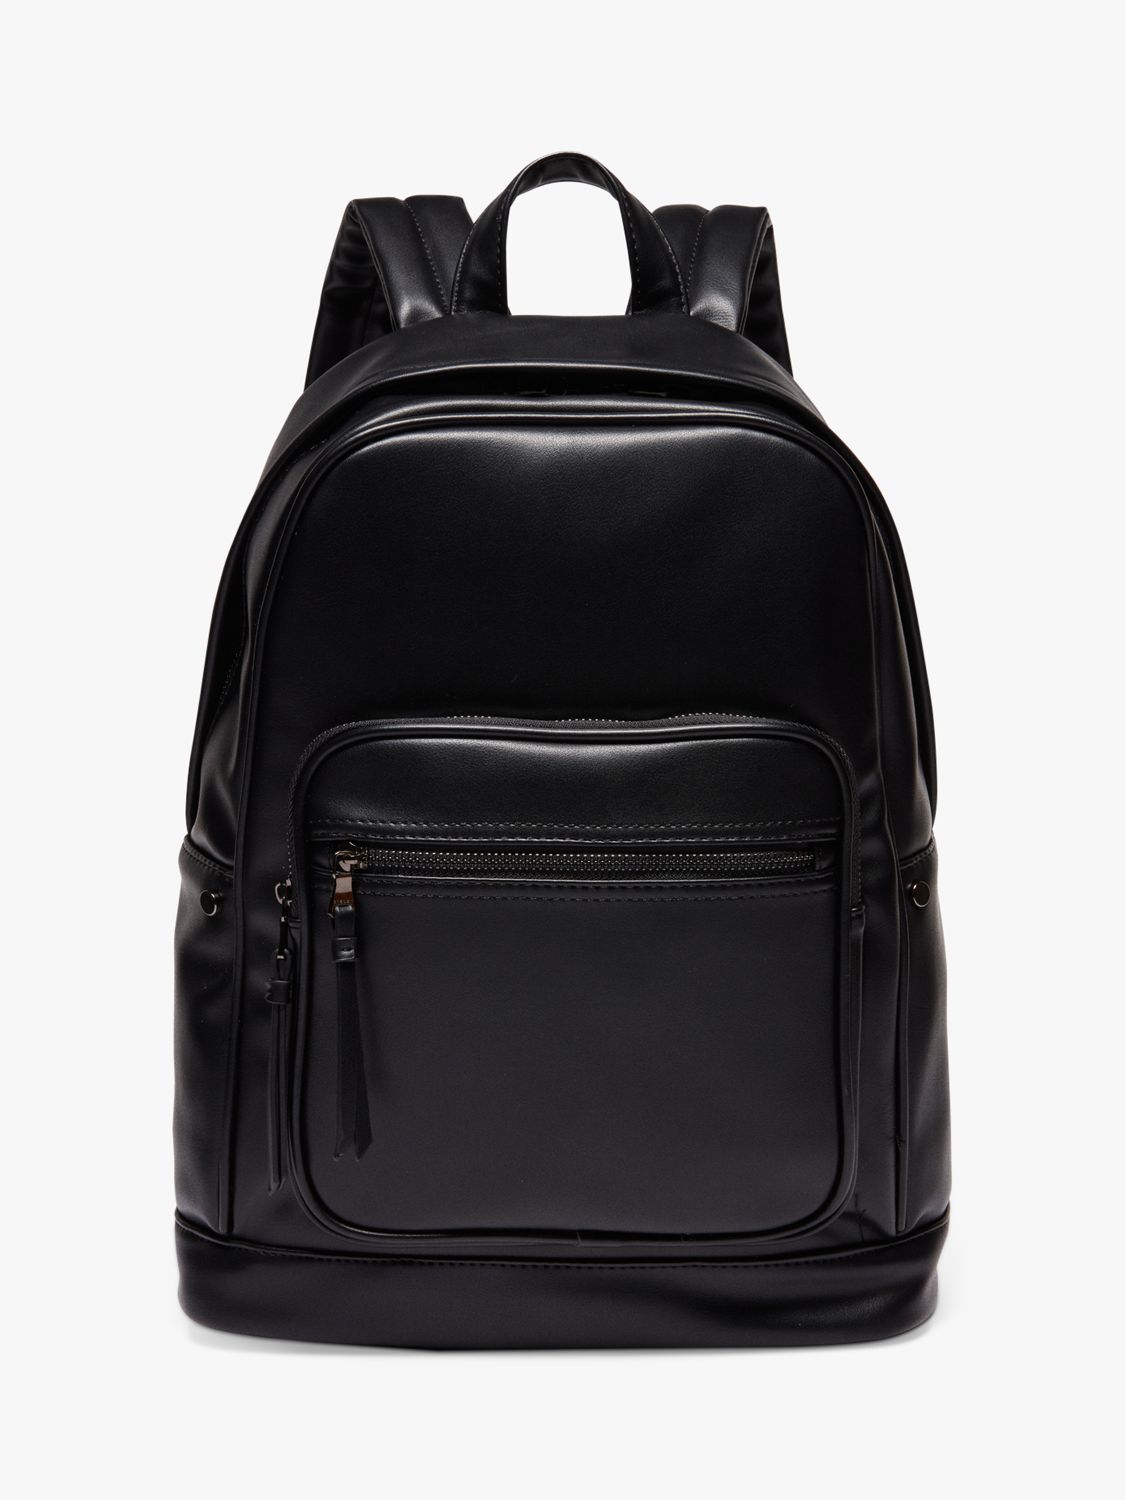 Buy SISLEY Faux Leather Double Compartment Rucksack, Black Online at johnlewis.com